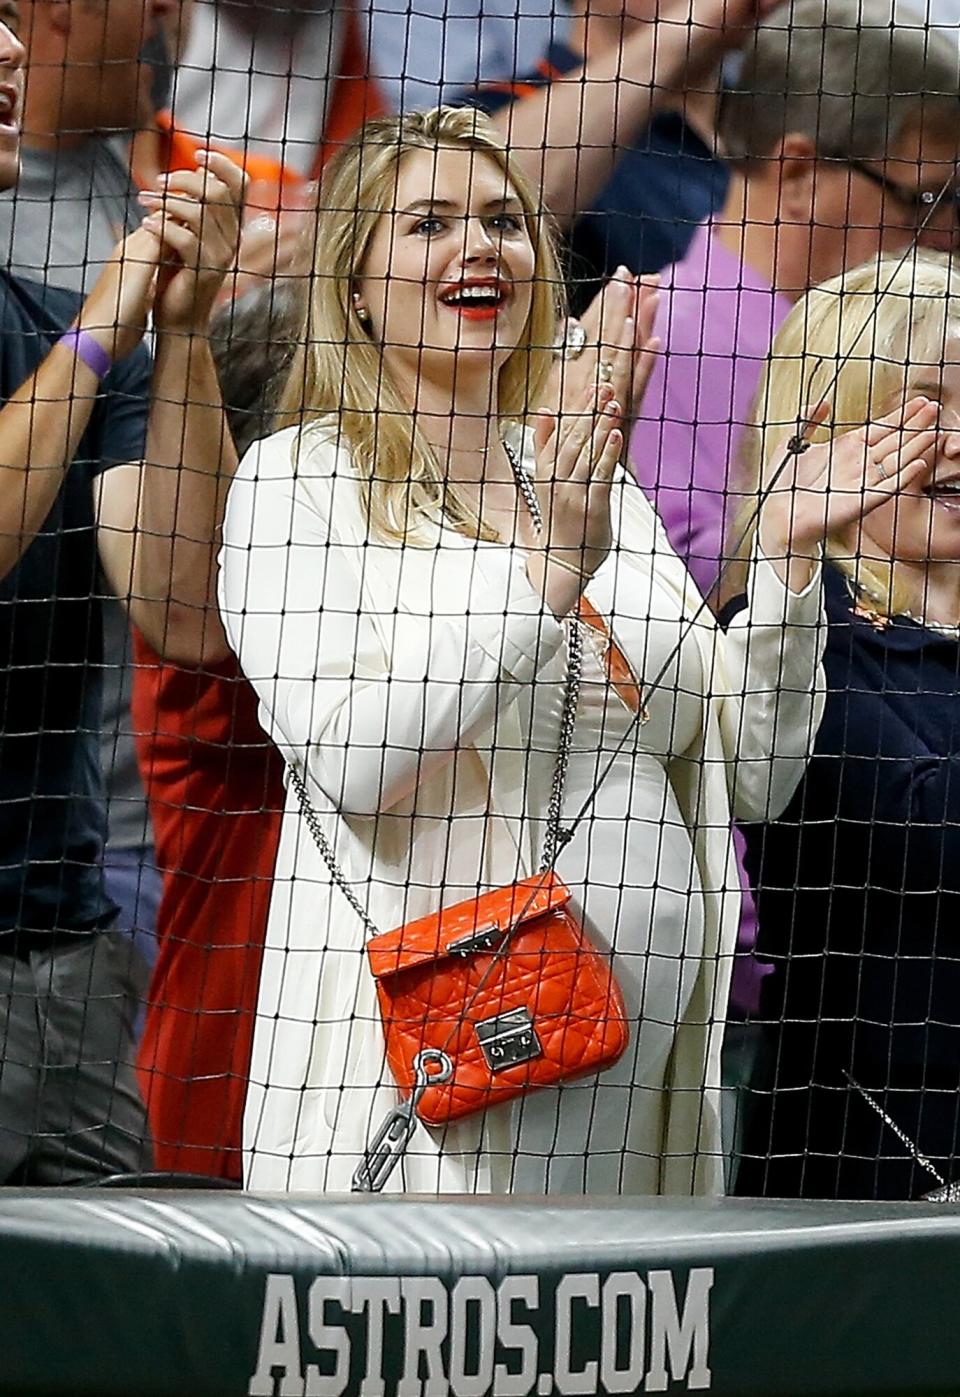 Kate Upton, celebrates after the Houston Astros defeated the Cleveland Indians 3-1 in Game Two of the American League Division Series at Minute Maid Park on October 6, 2018 in Houston, Texas